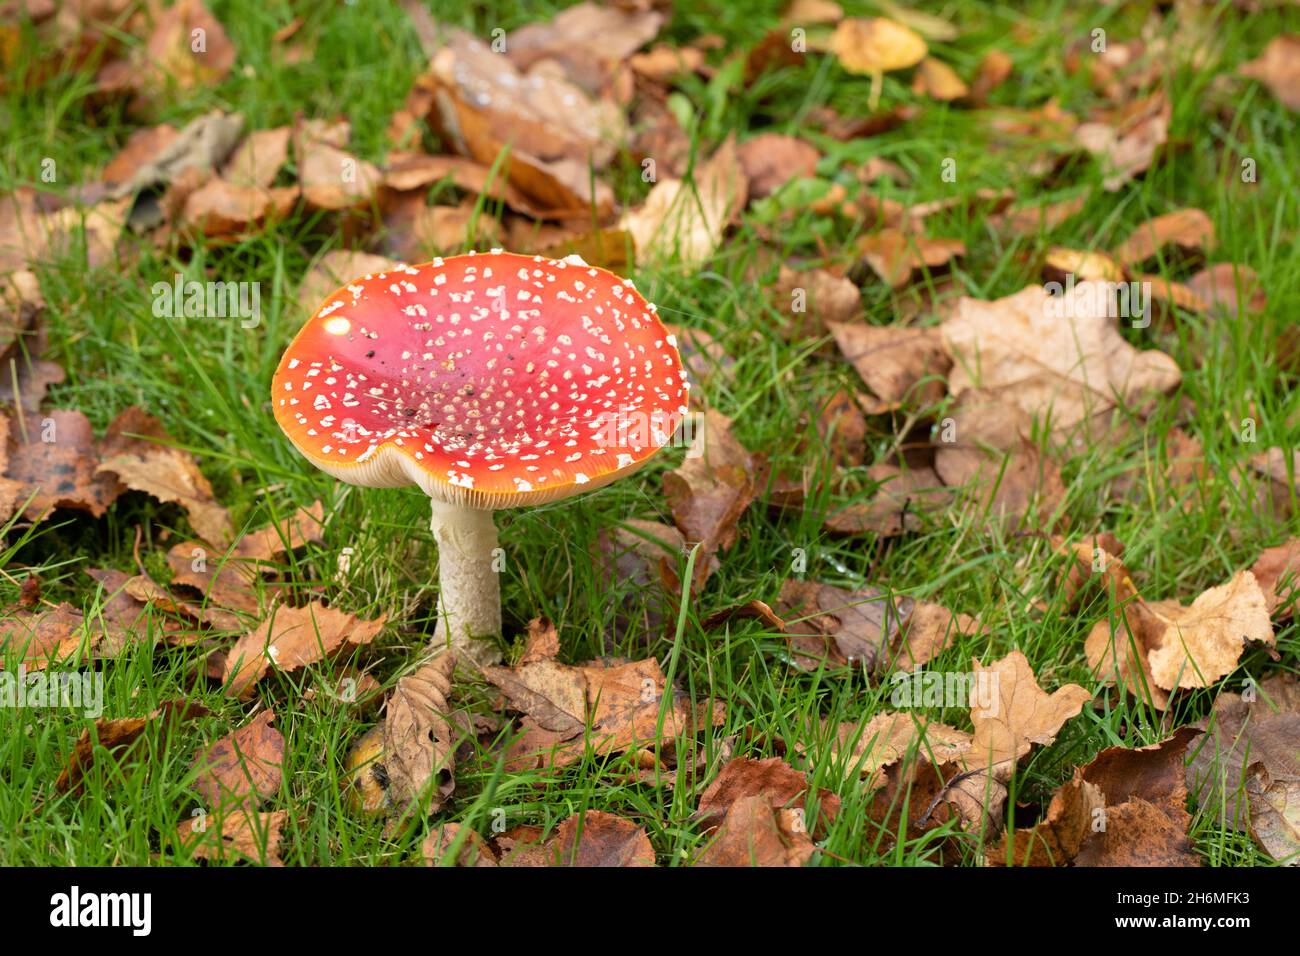 Toadstool identification Fly Agaric, symbiotsis relationship with Birch Betula sp. the, evidence autumn deciduous  leaves on ground alongside fungi. Stock Photo